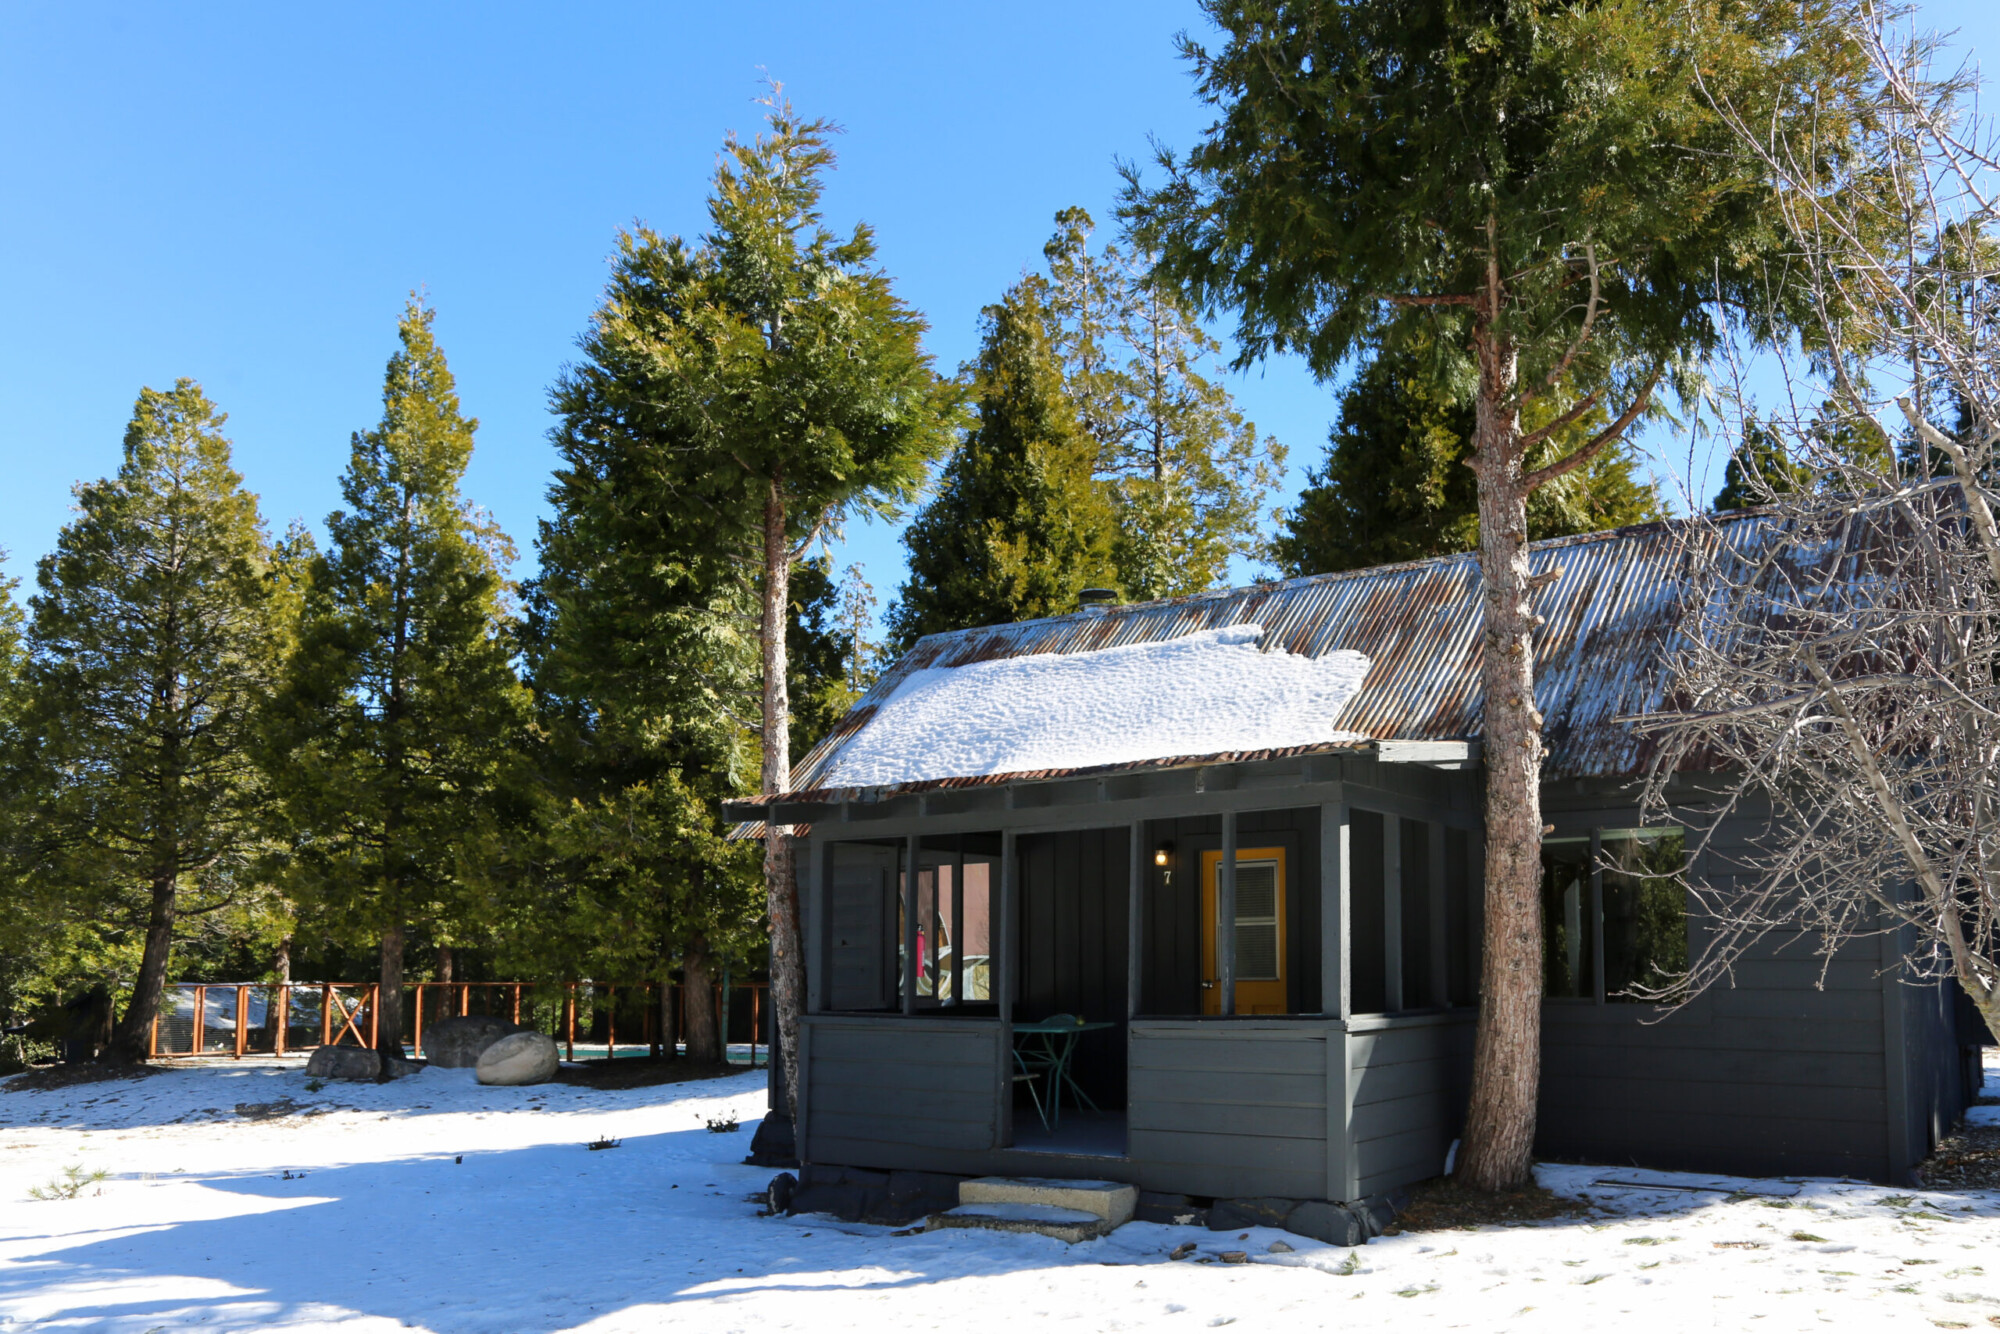 Exterior view of Perch Cabin rental in the winter with snow in Lake Arrowhead, California.